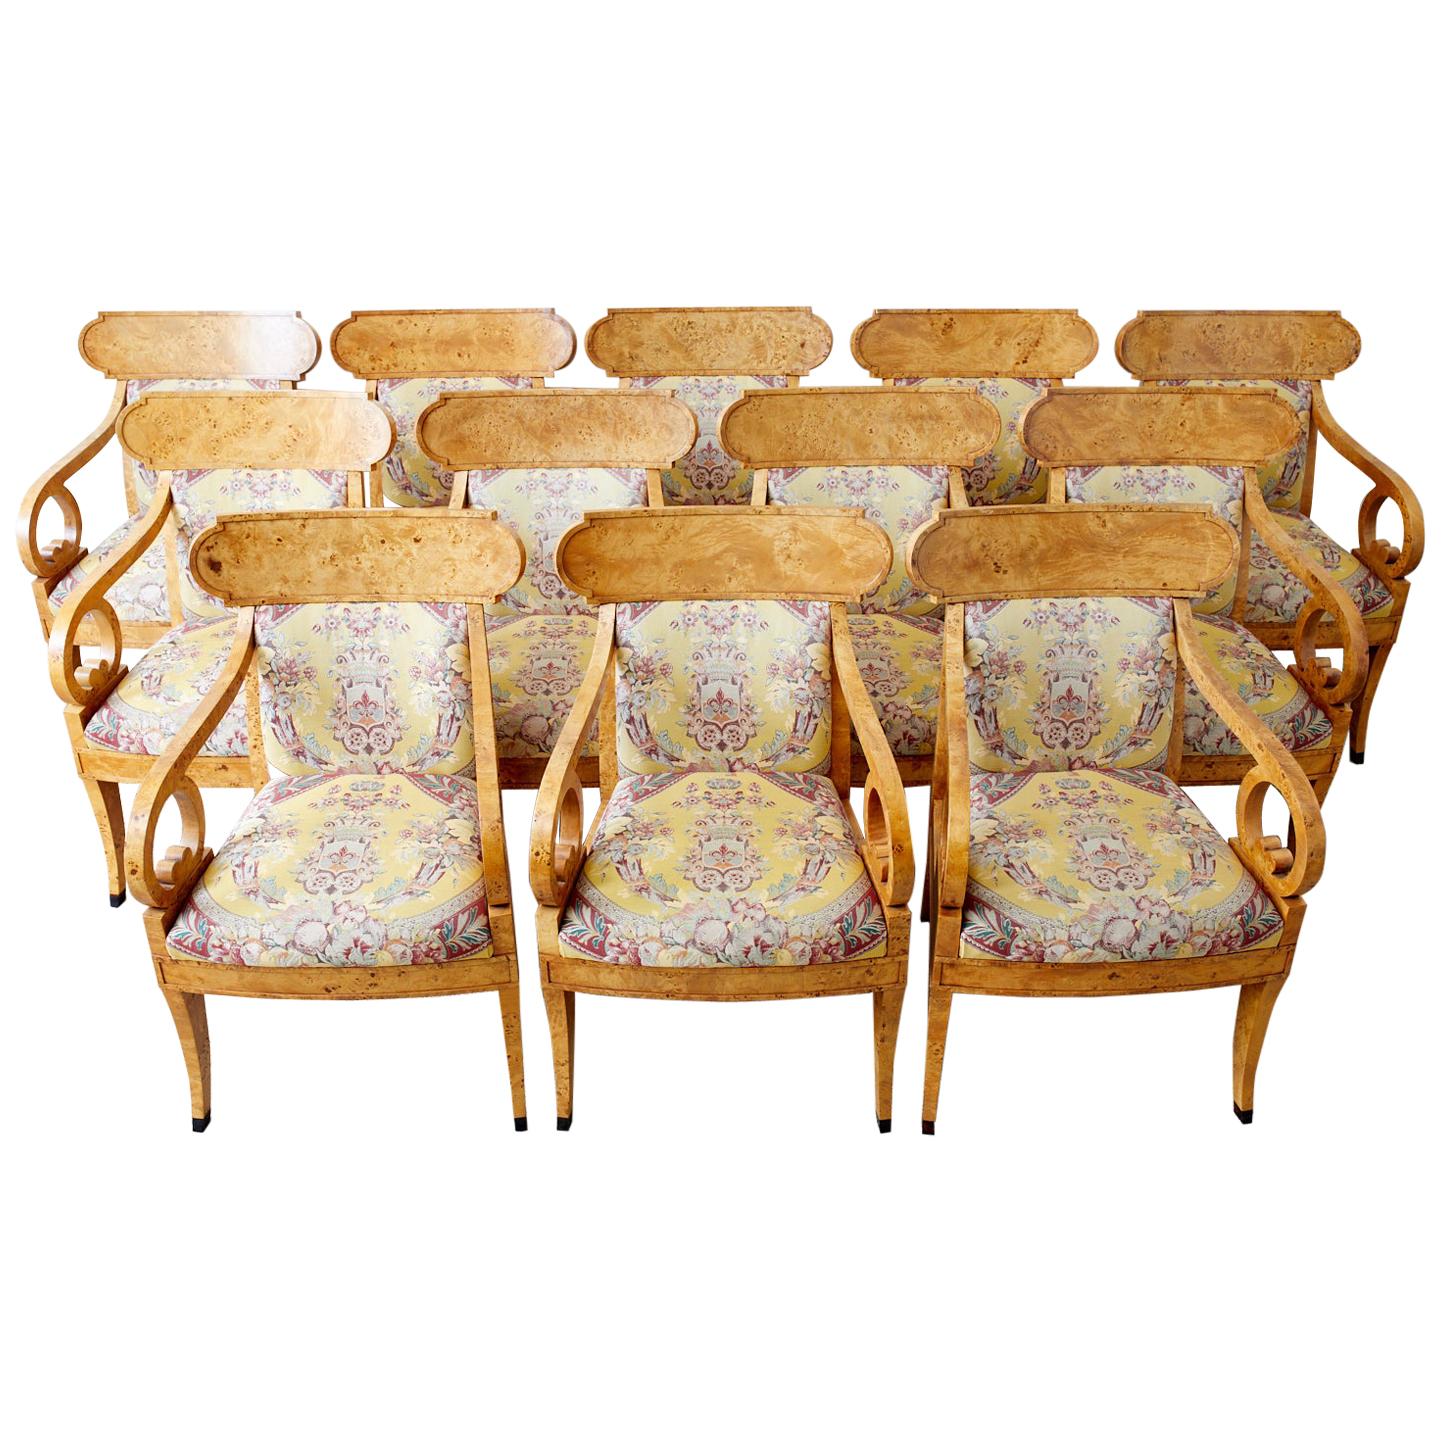 Magnificent English Regency style klismos armchairs or dining chairs made by Baker Furniture. Featuring handcrafted frames covered with dramatic burl wood veneers. The klismos form curved backrest is conjoined by gracefully curved arms ending with